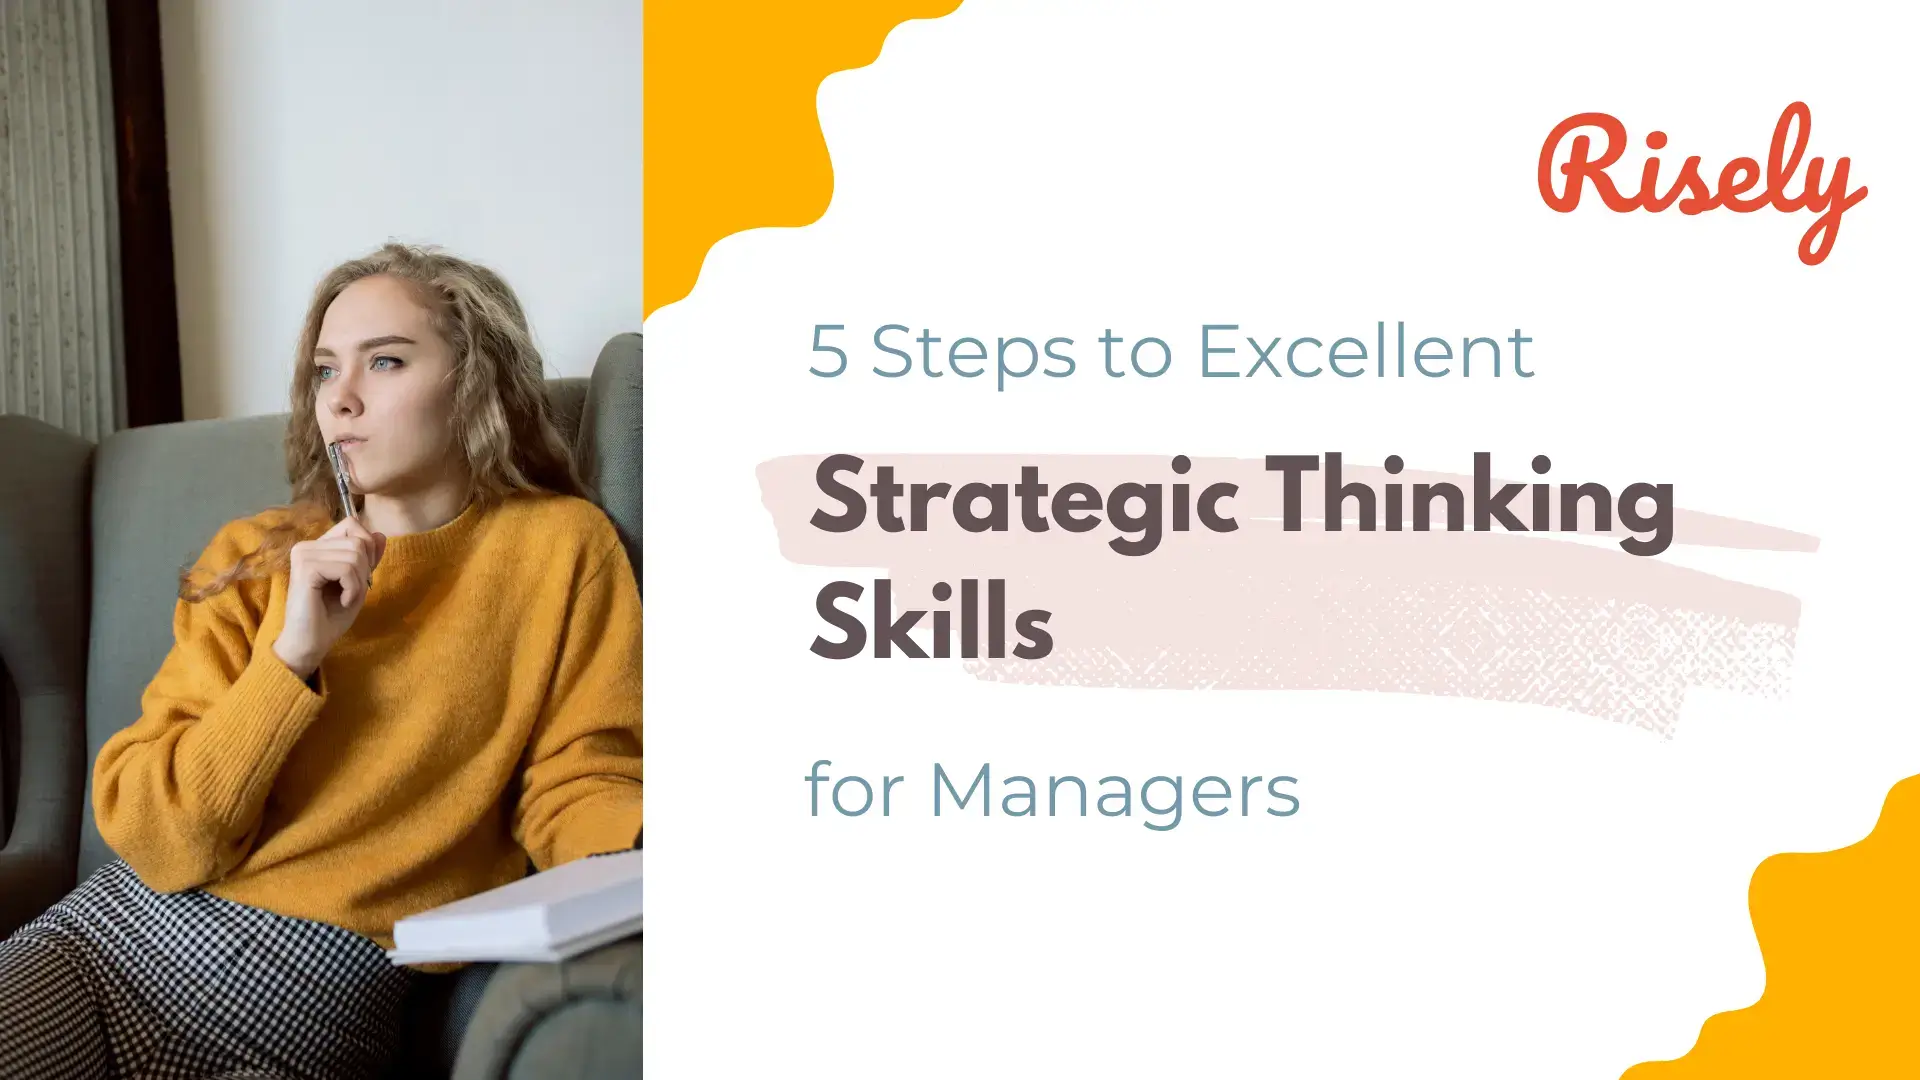 5 Steps to Excellent Strategic Thinking Skills for Managers